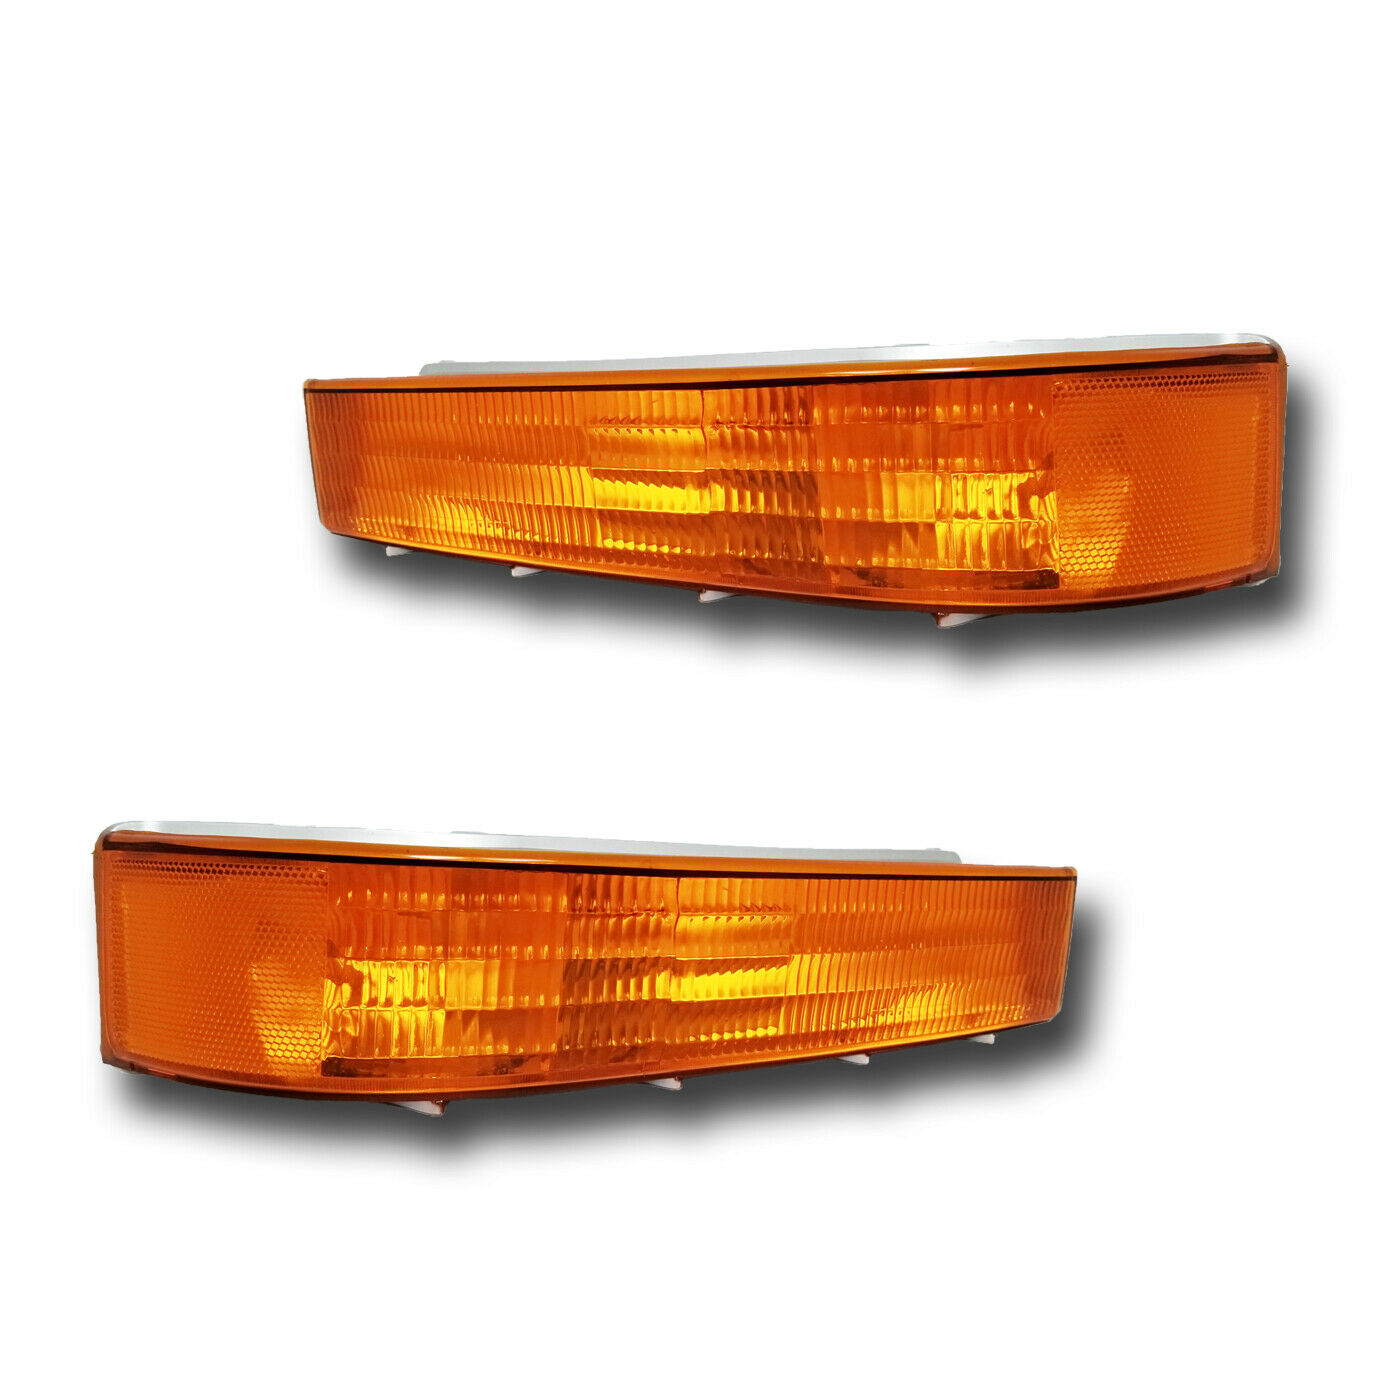 National RV Surf Side Turn Signal Lamps Unit Pair (Left & Right)